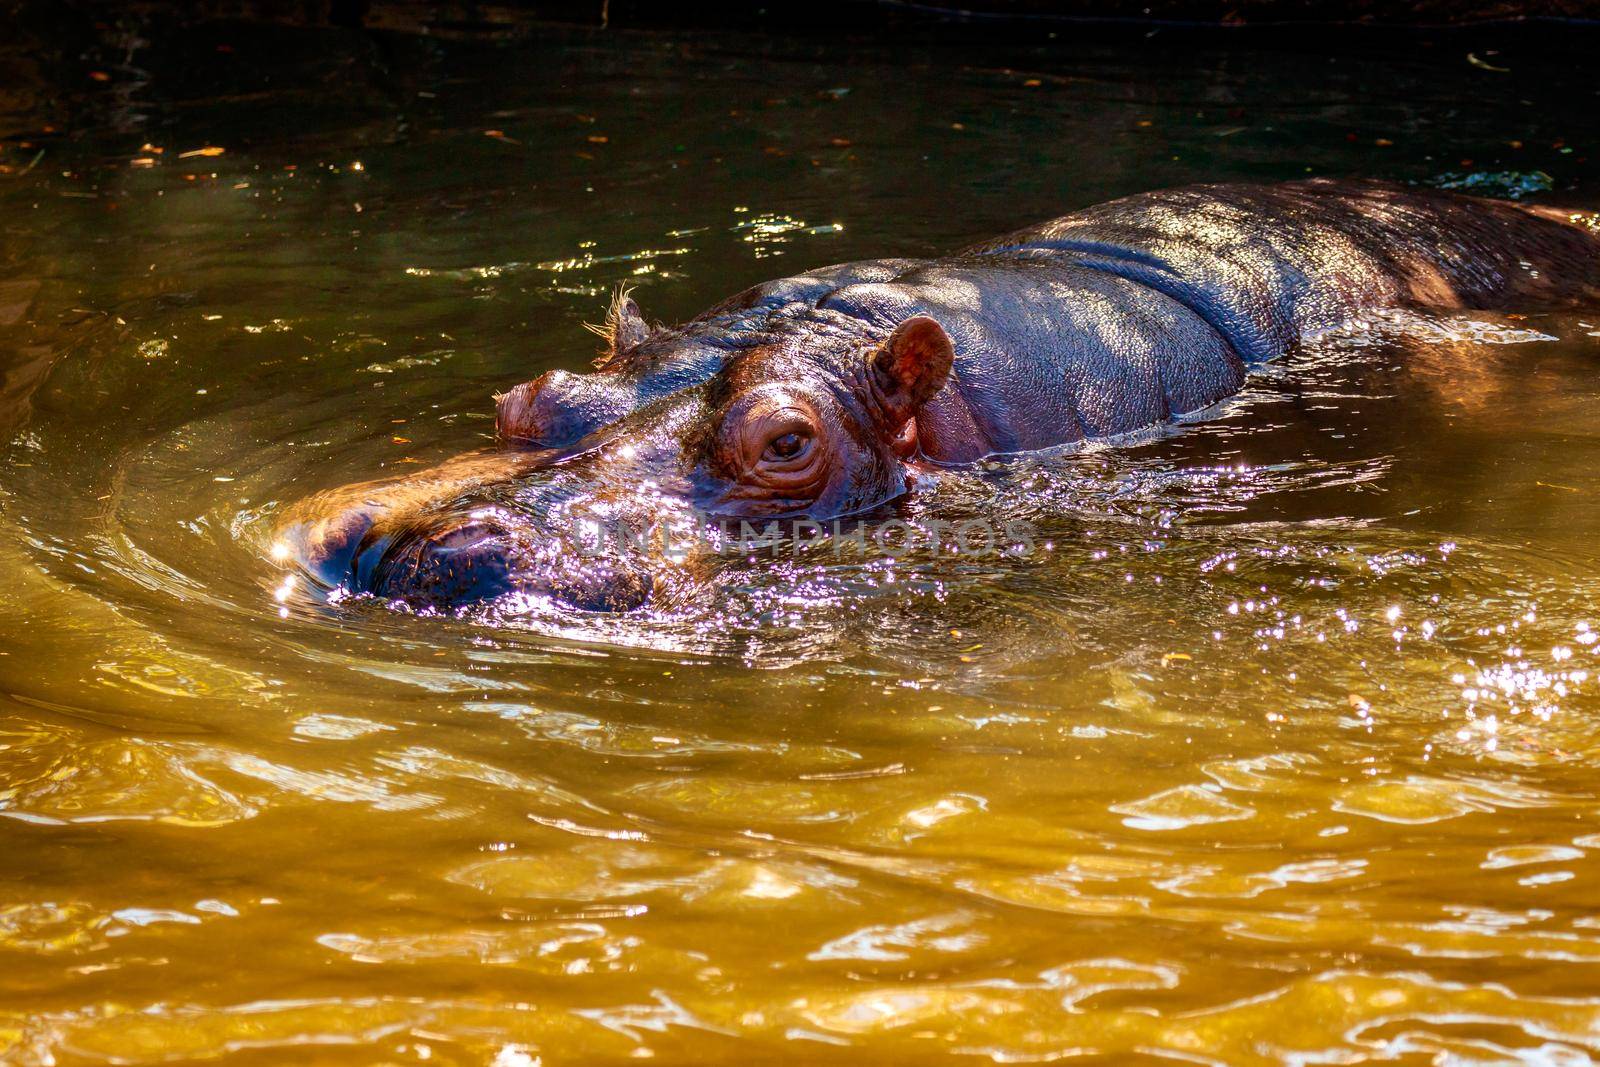 A Hippopotamus submerged in water, with eyes showing.